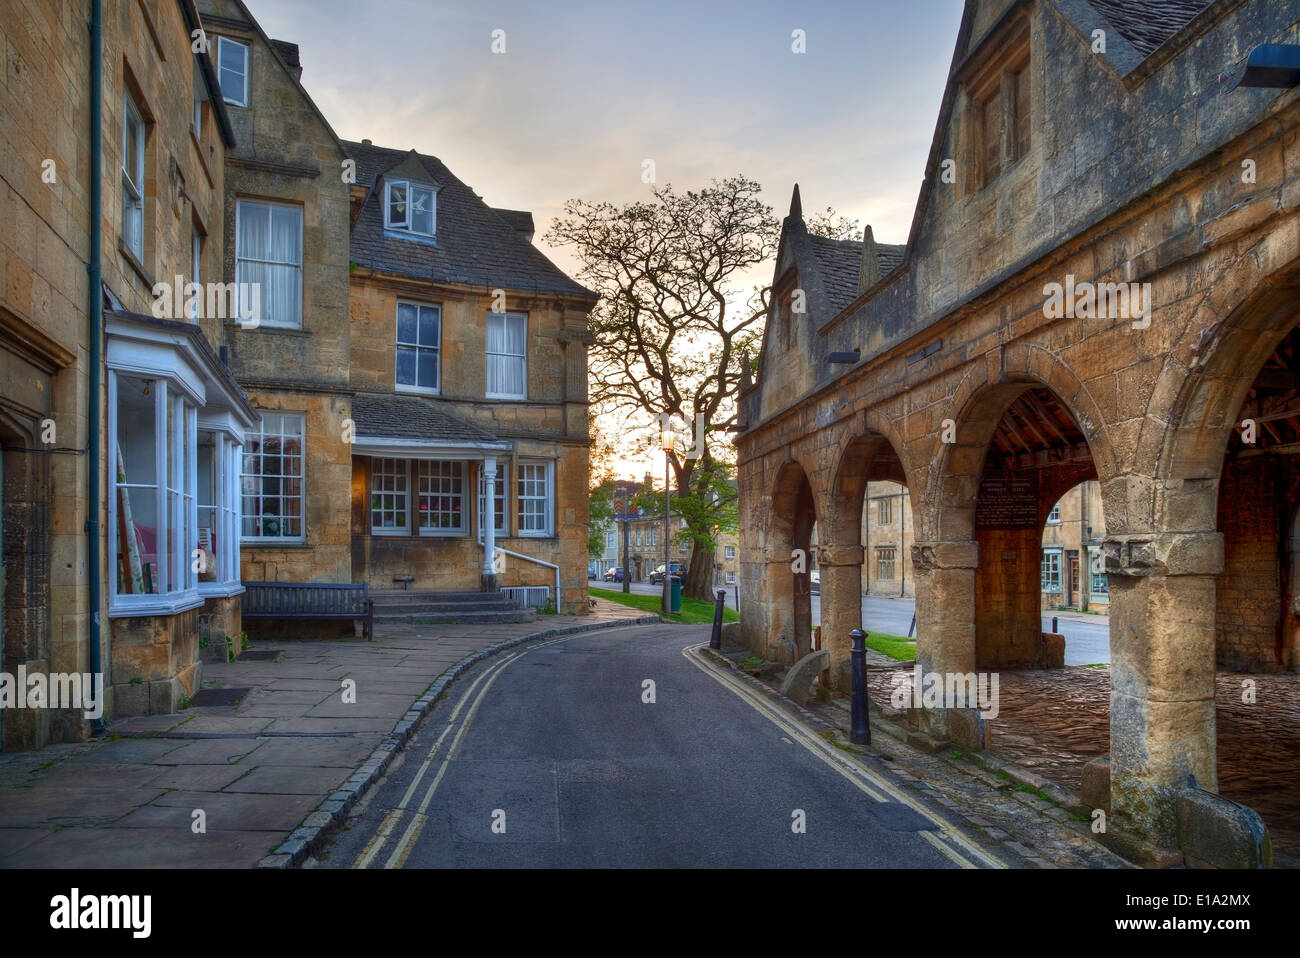 Die alte Markthalle in Chipping Campden, Gloucestershire, England. Stockfoto